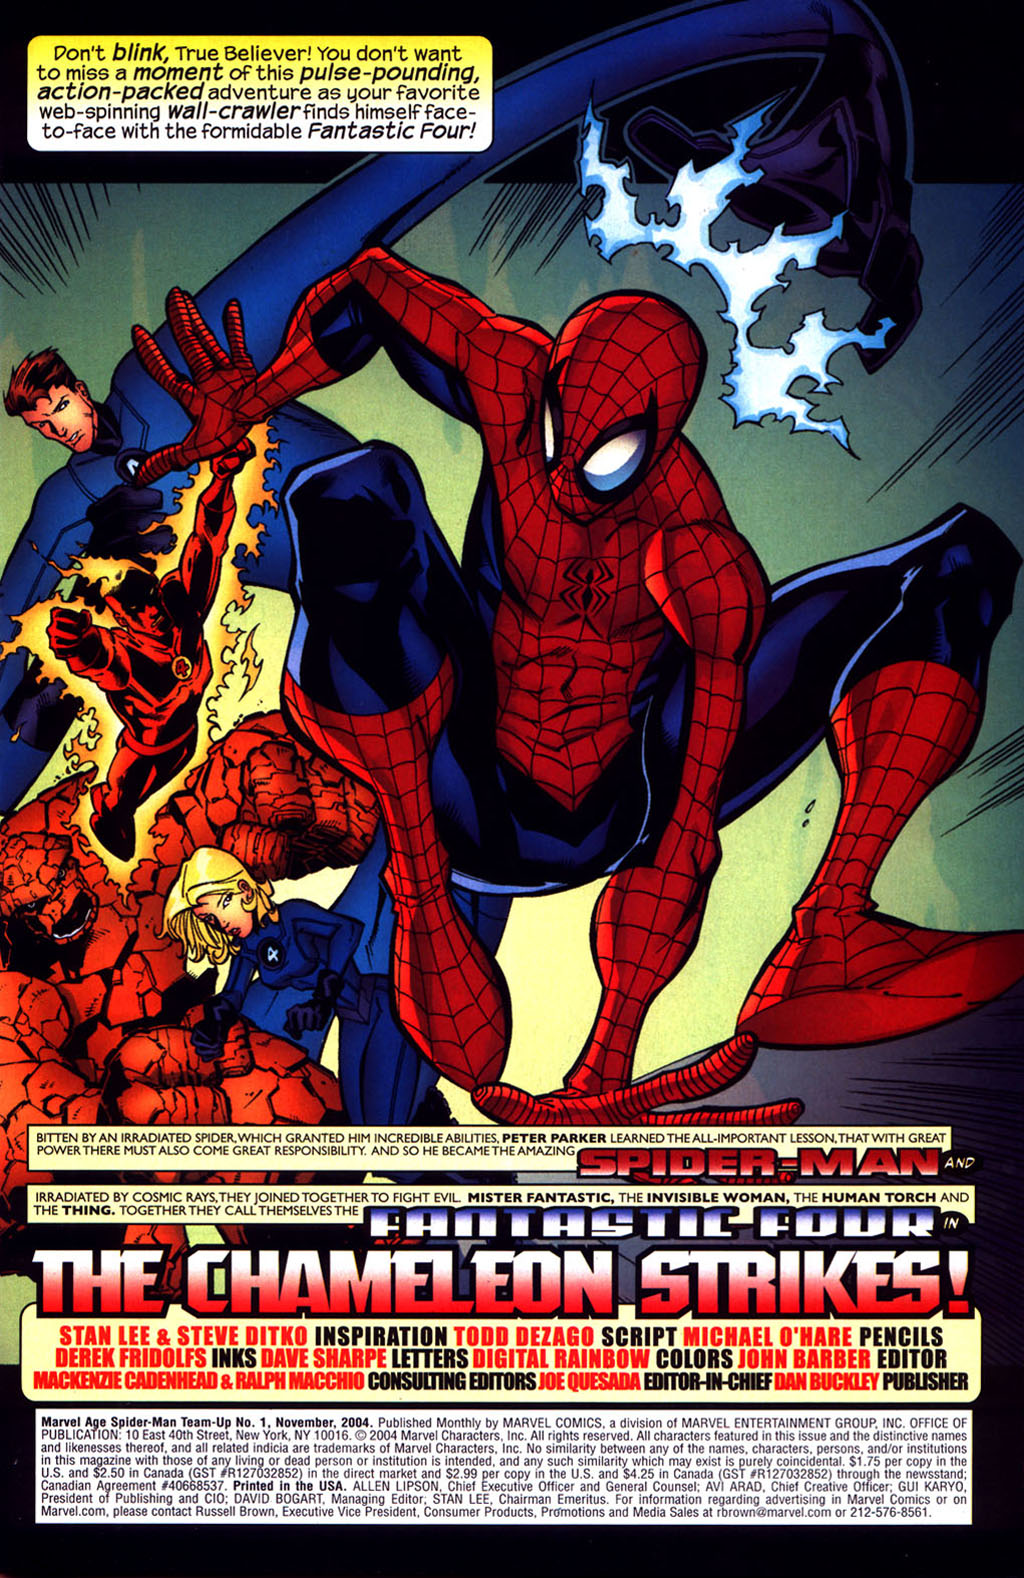 Read online Marvel Age: Spider-Man Team-Up comic -  Issue #1 - 2